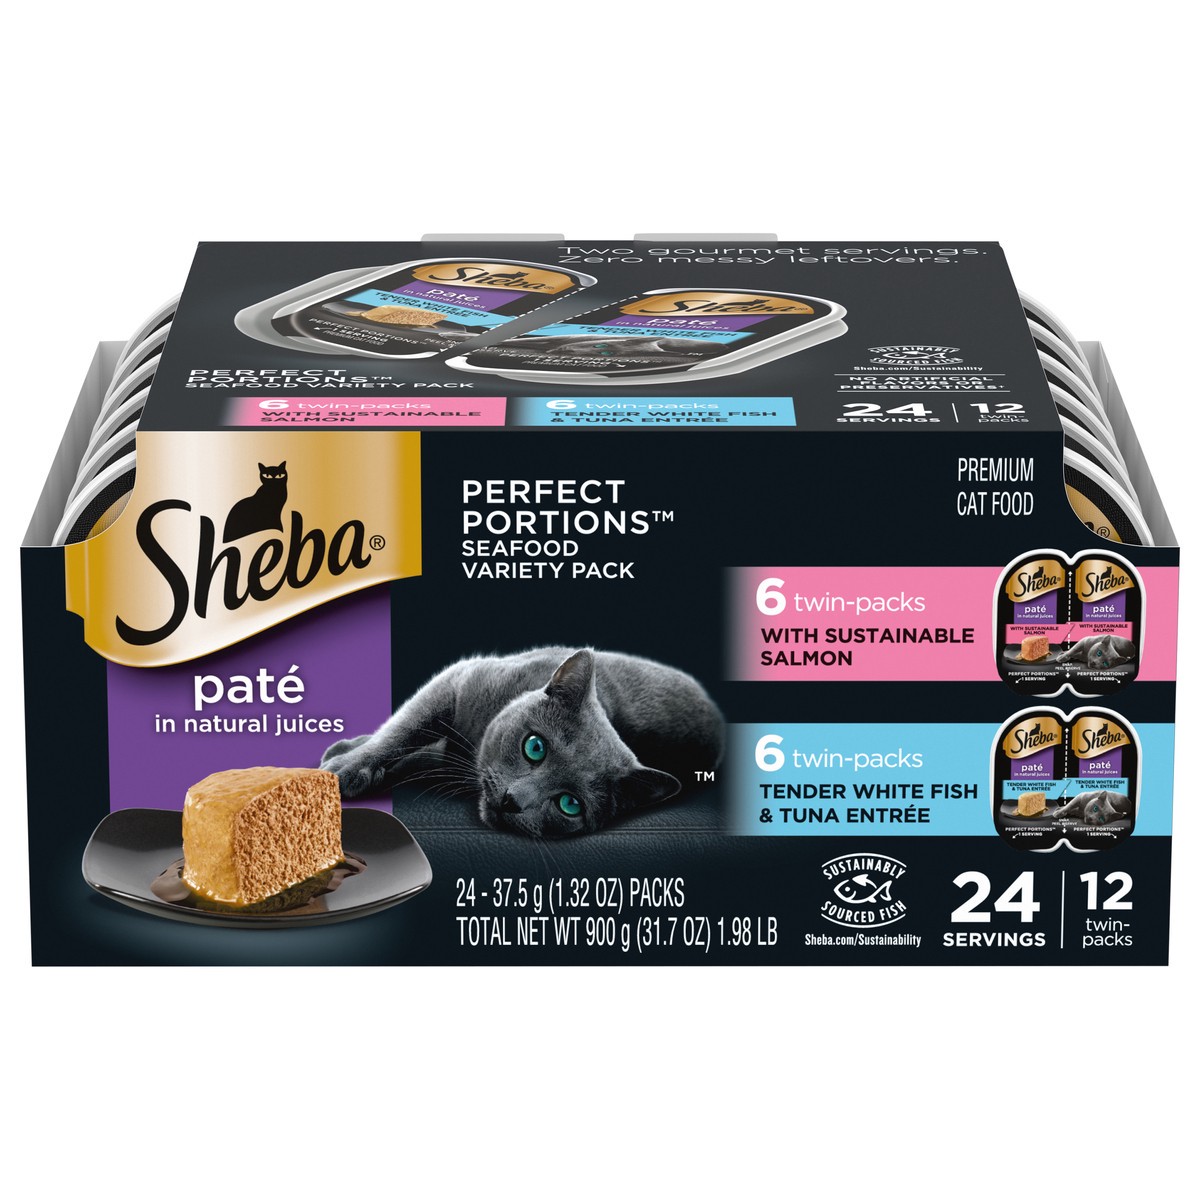 slide 1 of 3, Sheba Perfect Portions Pate in Natural Juices with Sustainable Salmon/Tender White Fish & Tuna Entree Cat Food Seafood Variety Pack 24 - 37.5 g Packs, 2.6 oz